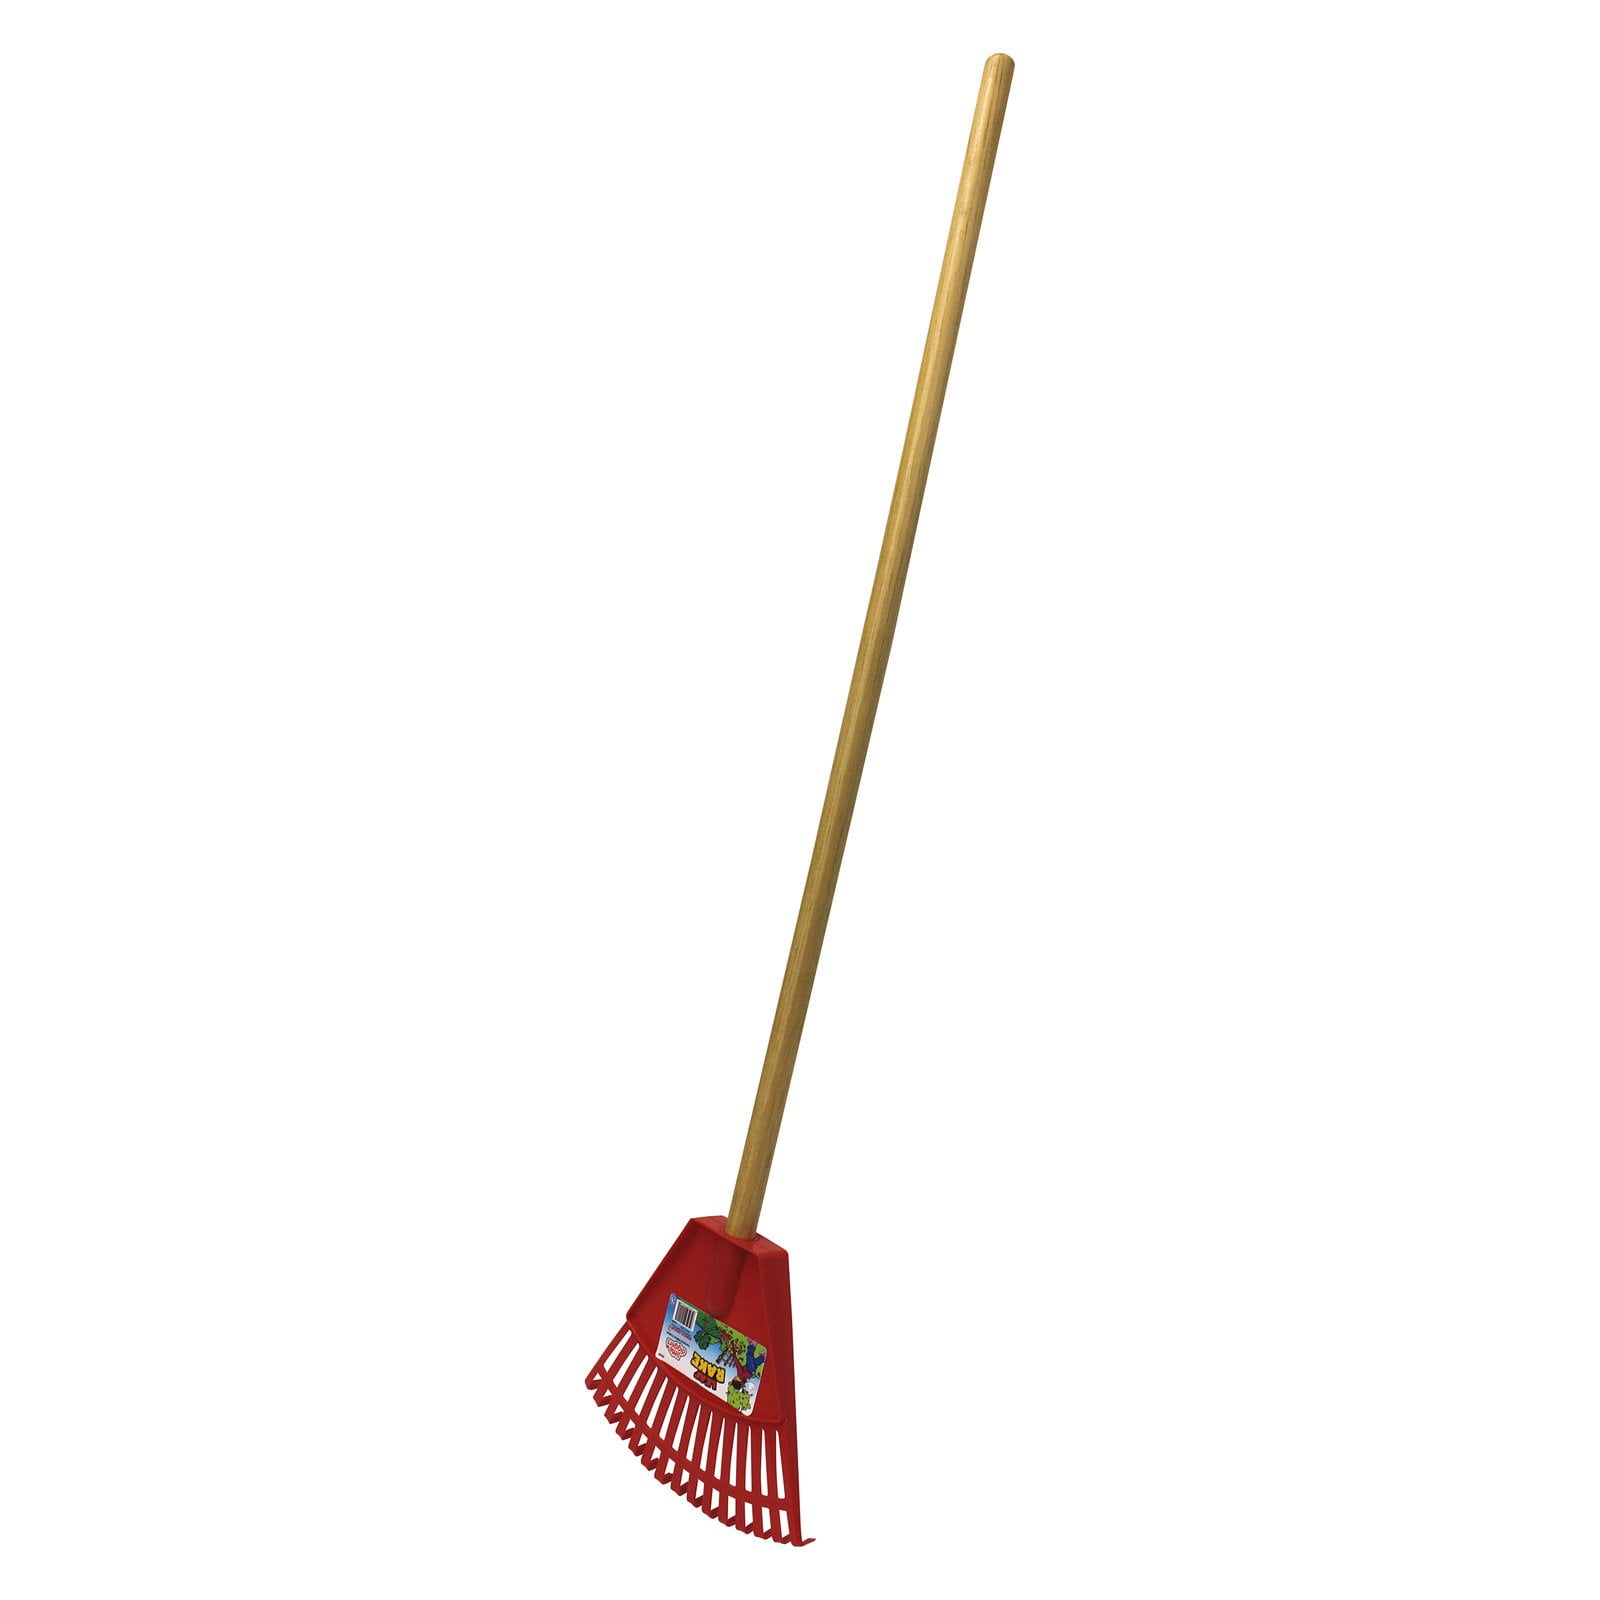 and Yards Superio Adult and Kids Rake Bundle with Hardwood Handle Durable Plastic Collect Loose Debris Among Delicate Plants Lawns 